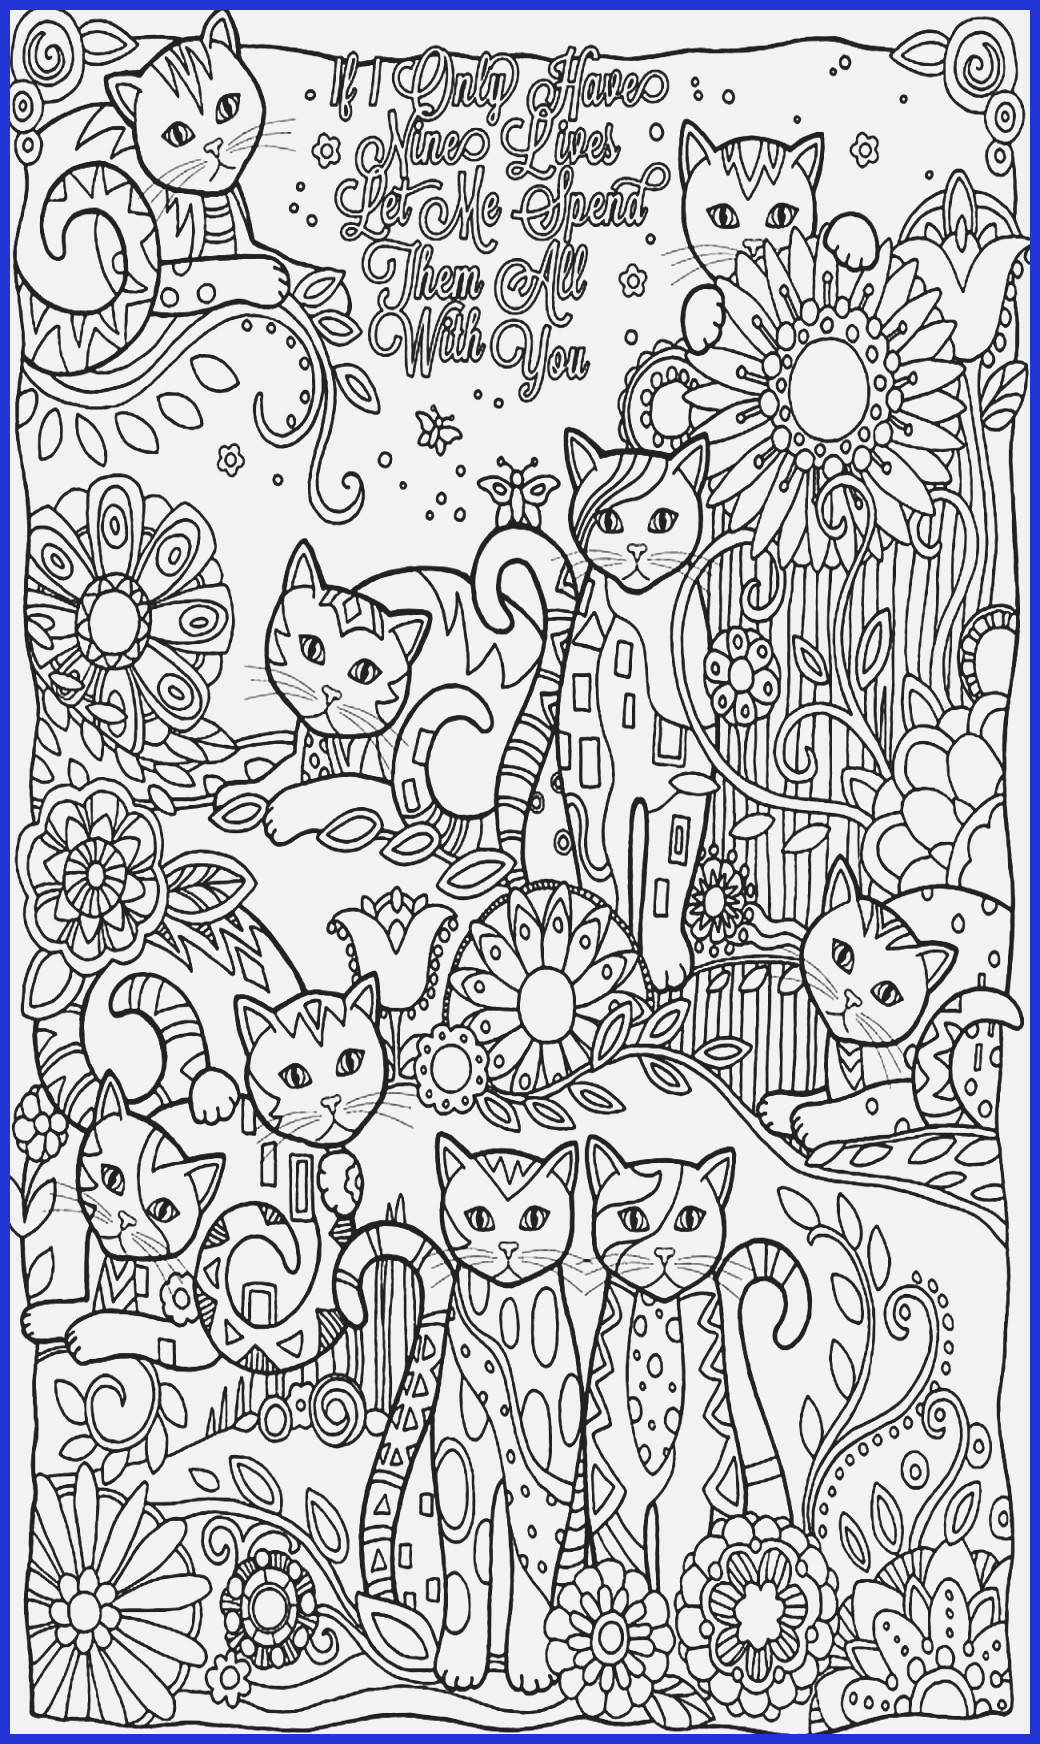 25 Popular White Owl Vase 2023 free download white owl vase of 16 coloring pages hard www gsfl info for cute printable coloring pages new printable od dog coloring pages